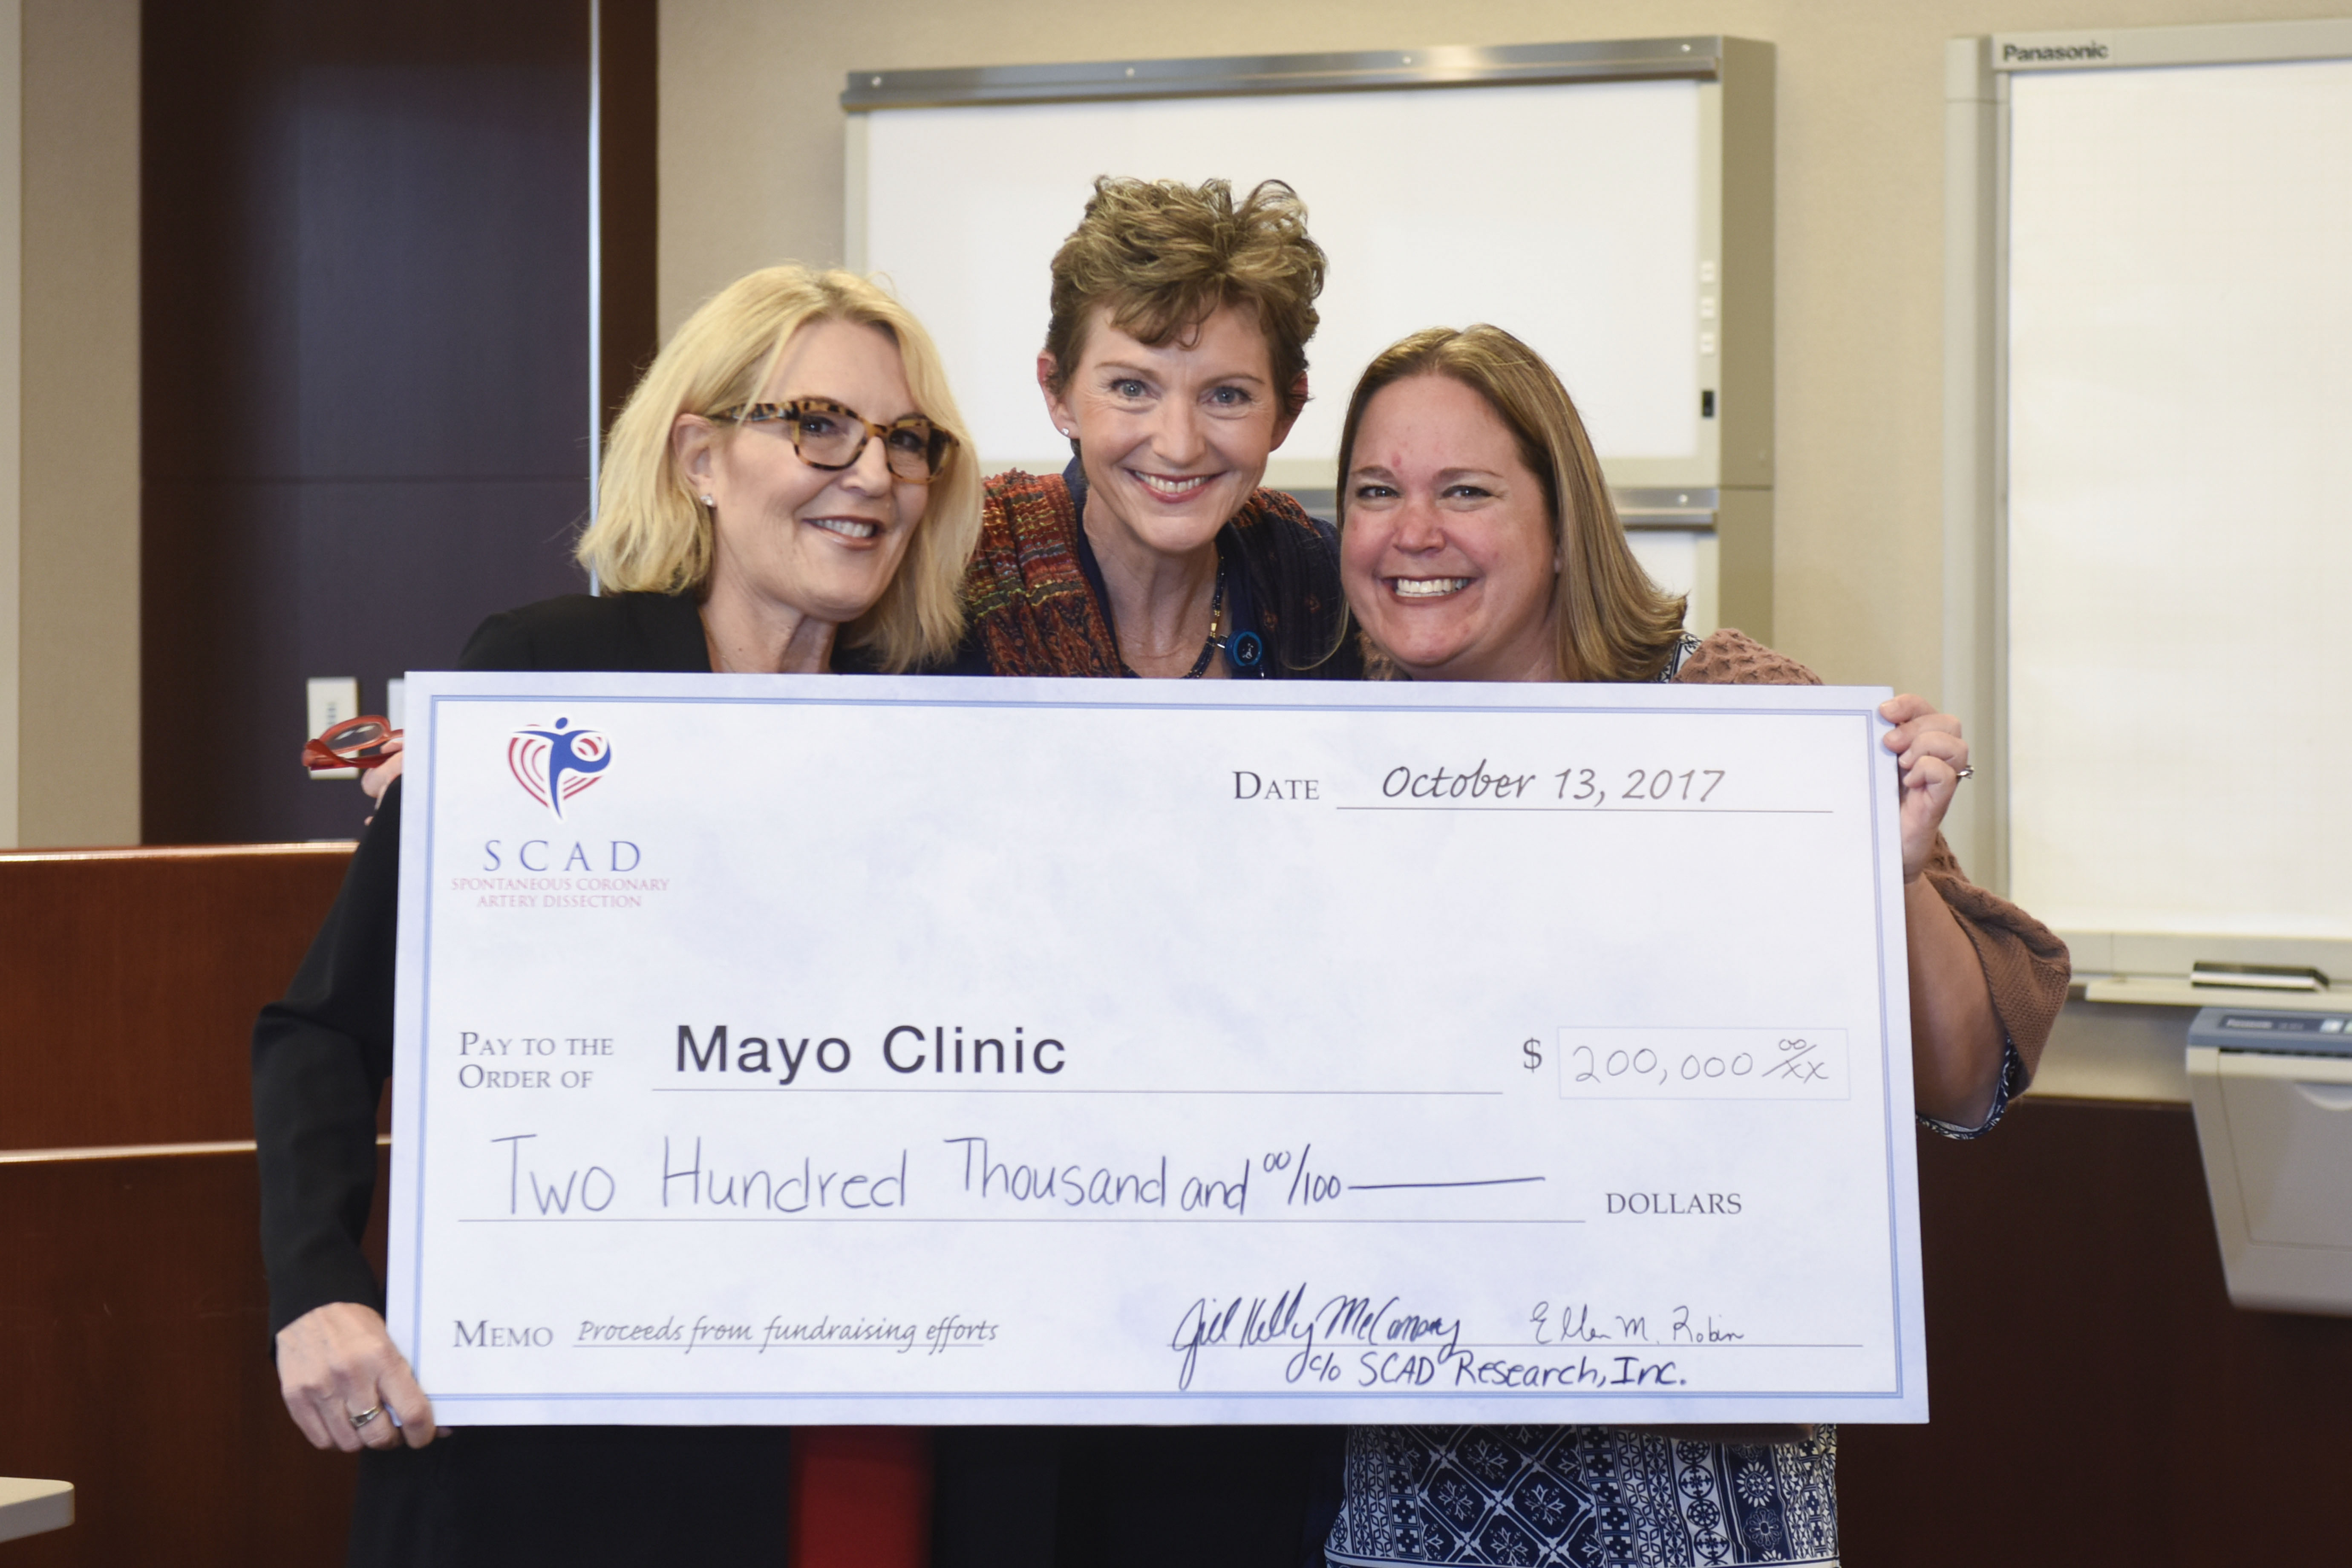 SCAD Research Mayo Clinic Donation